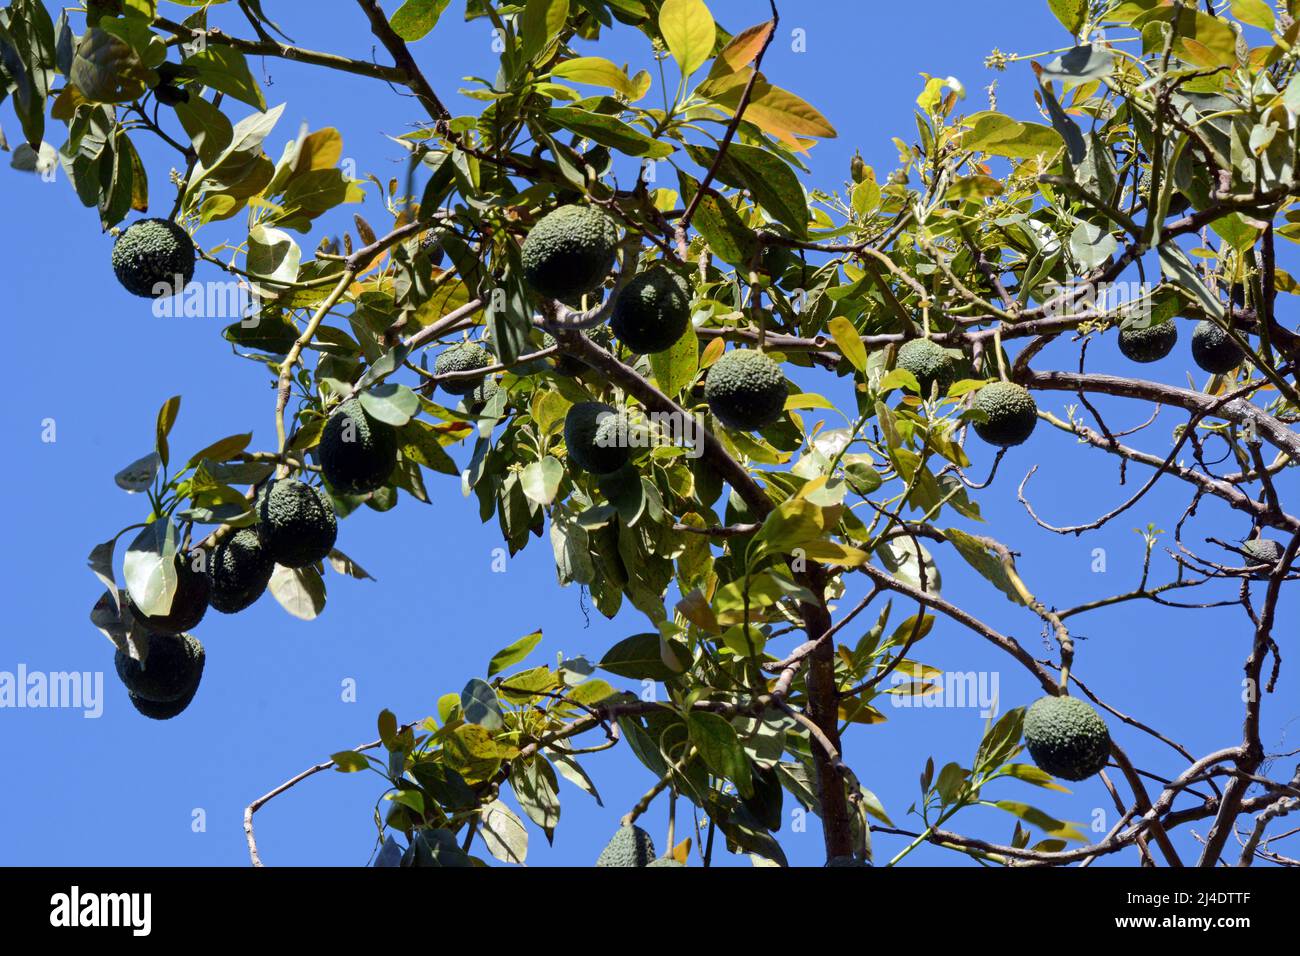 Nearly ripe Spanish avocados hanging from the branches of a tree on a farm (finca) in Los Realejos, on the island of Tenerife, Canary Islands, Spain Stock Photo